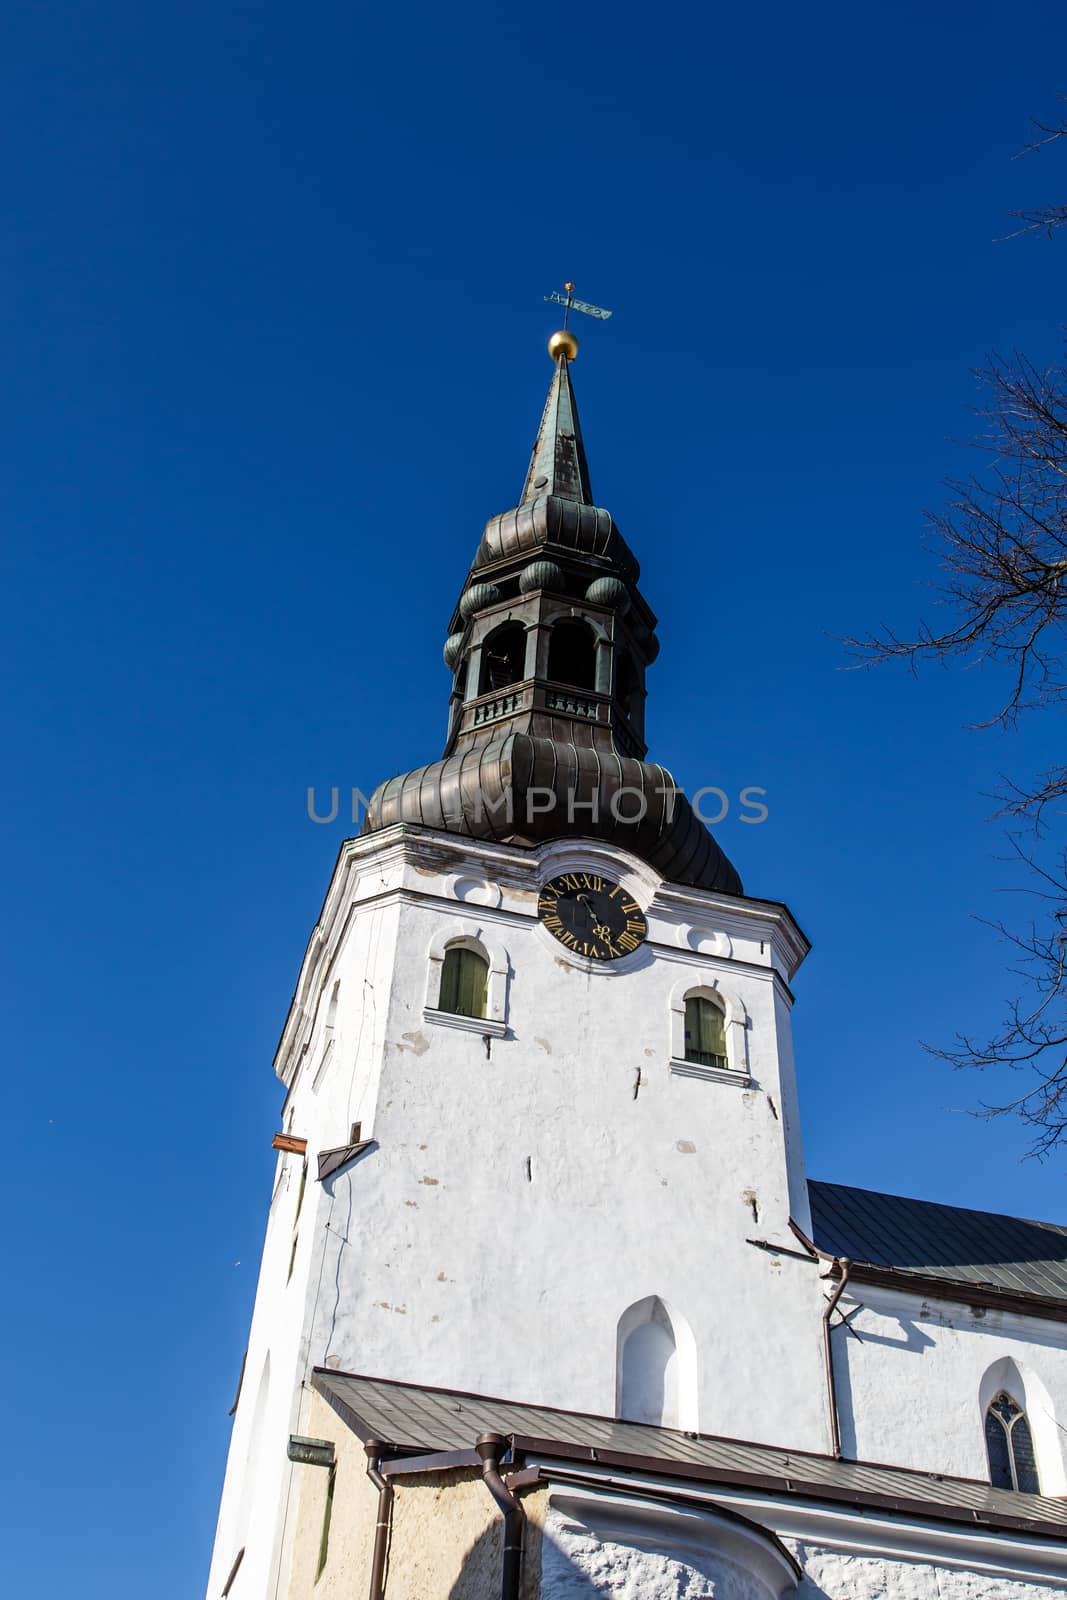 Close up detailed bottom view of the cathedral church of St Mary's located in Toompea Hill, in Tallinn, Estonia, on blue sky background.